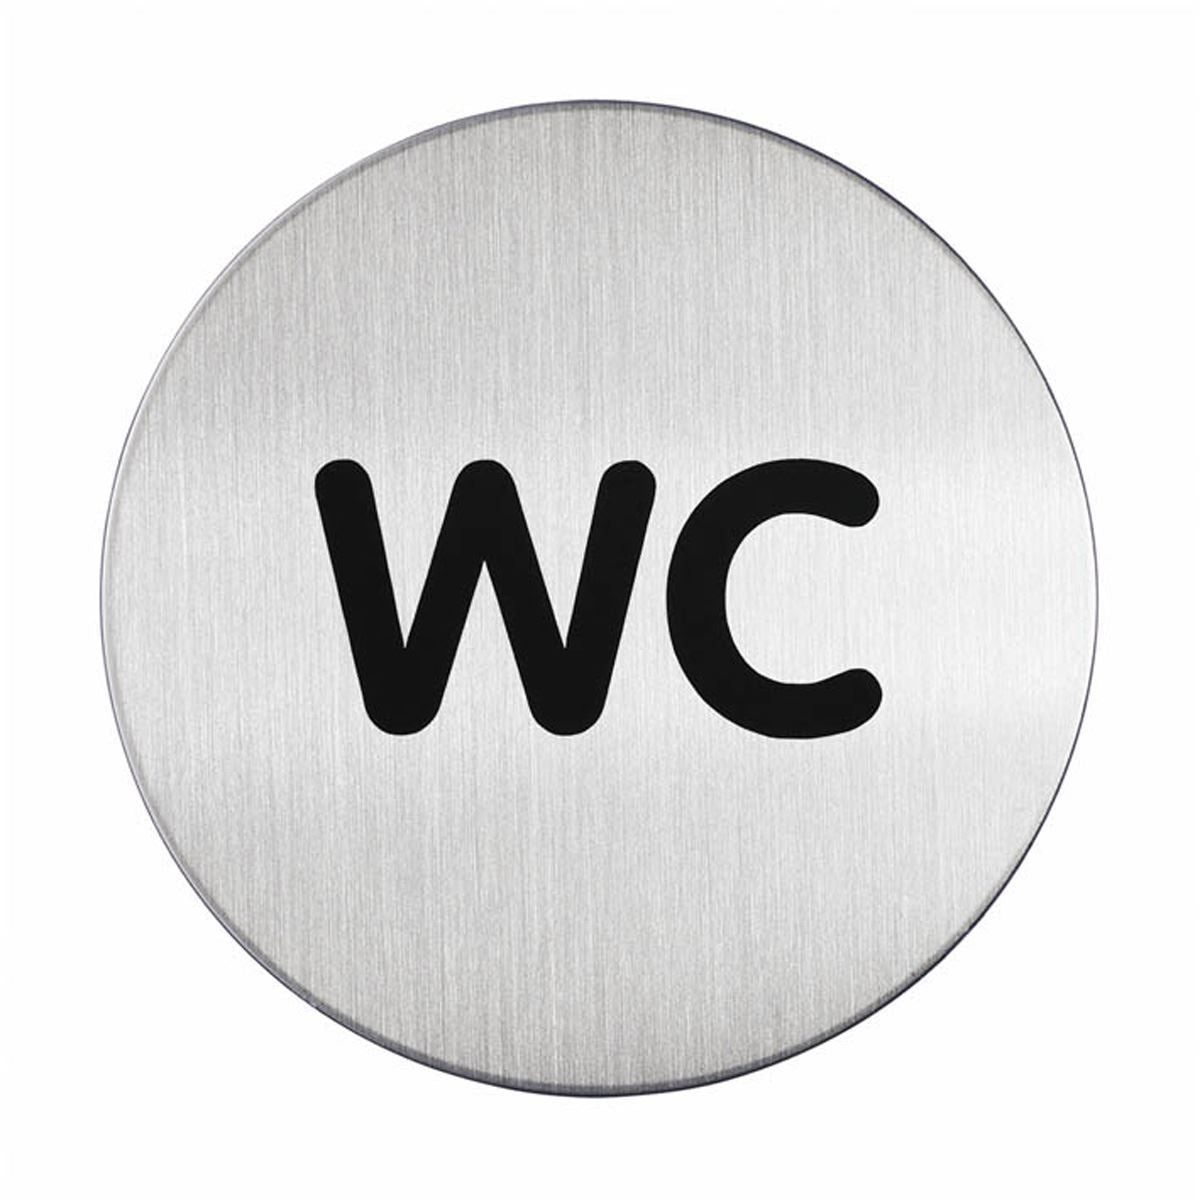 Durable Adhesive WC Symbol Bathroom Toilet Sign | Brushed Stainless Steel | 83mm